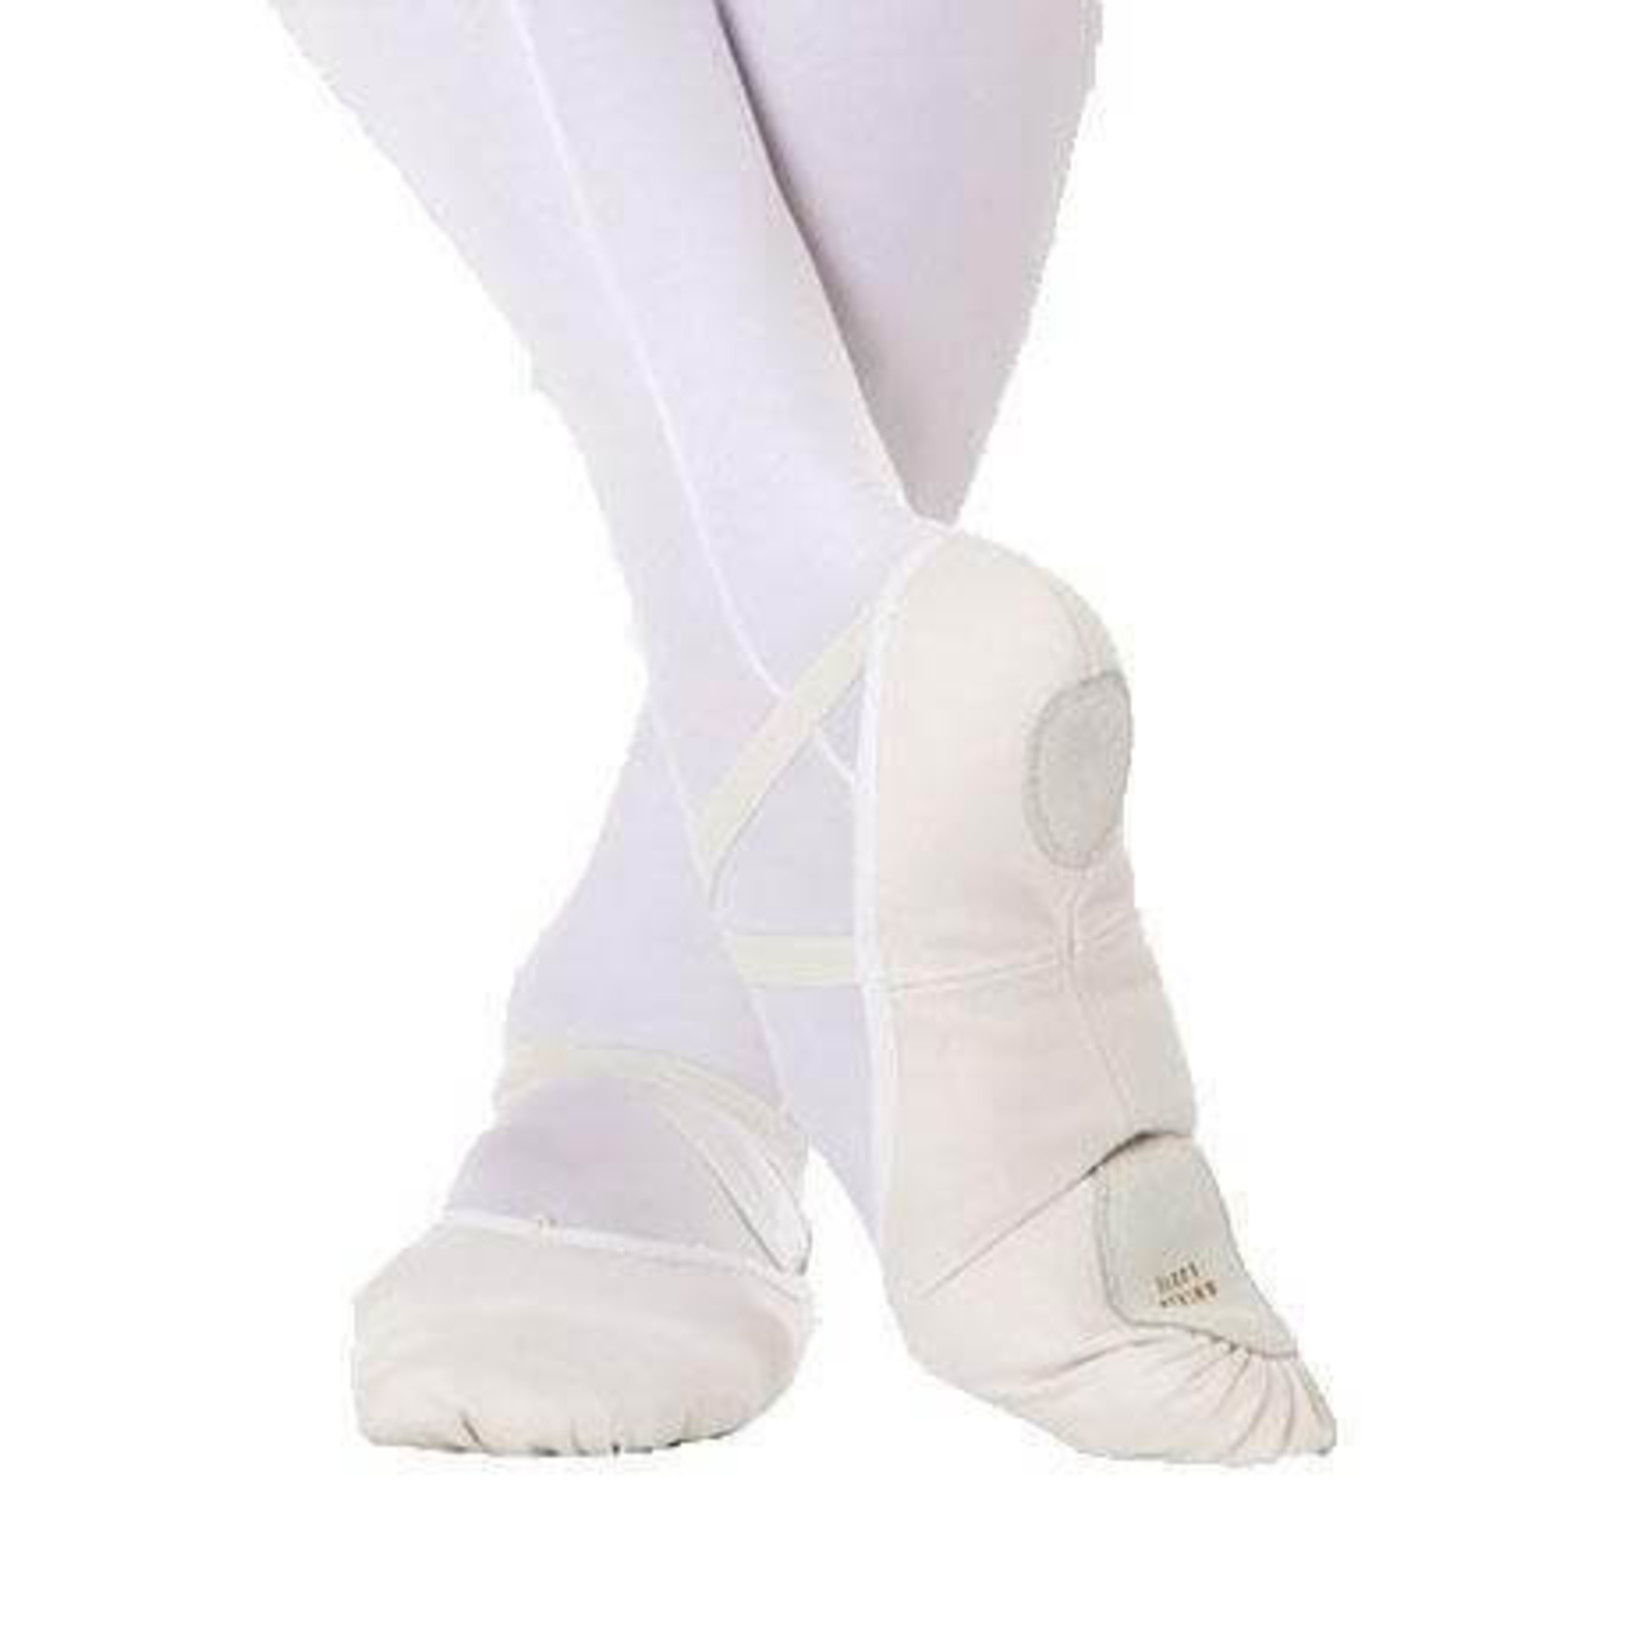 Body Wrappers Adult Wendy totalSTRETCH Canvas Ballet Shoe